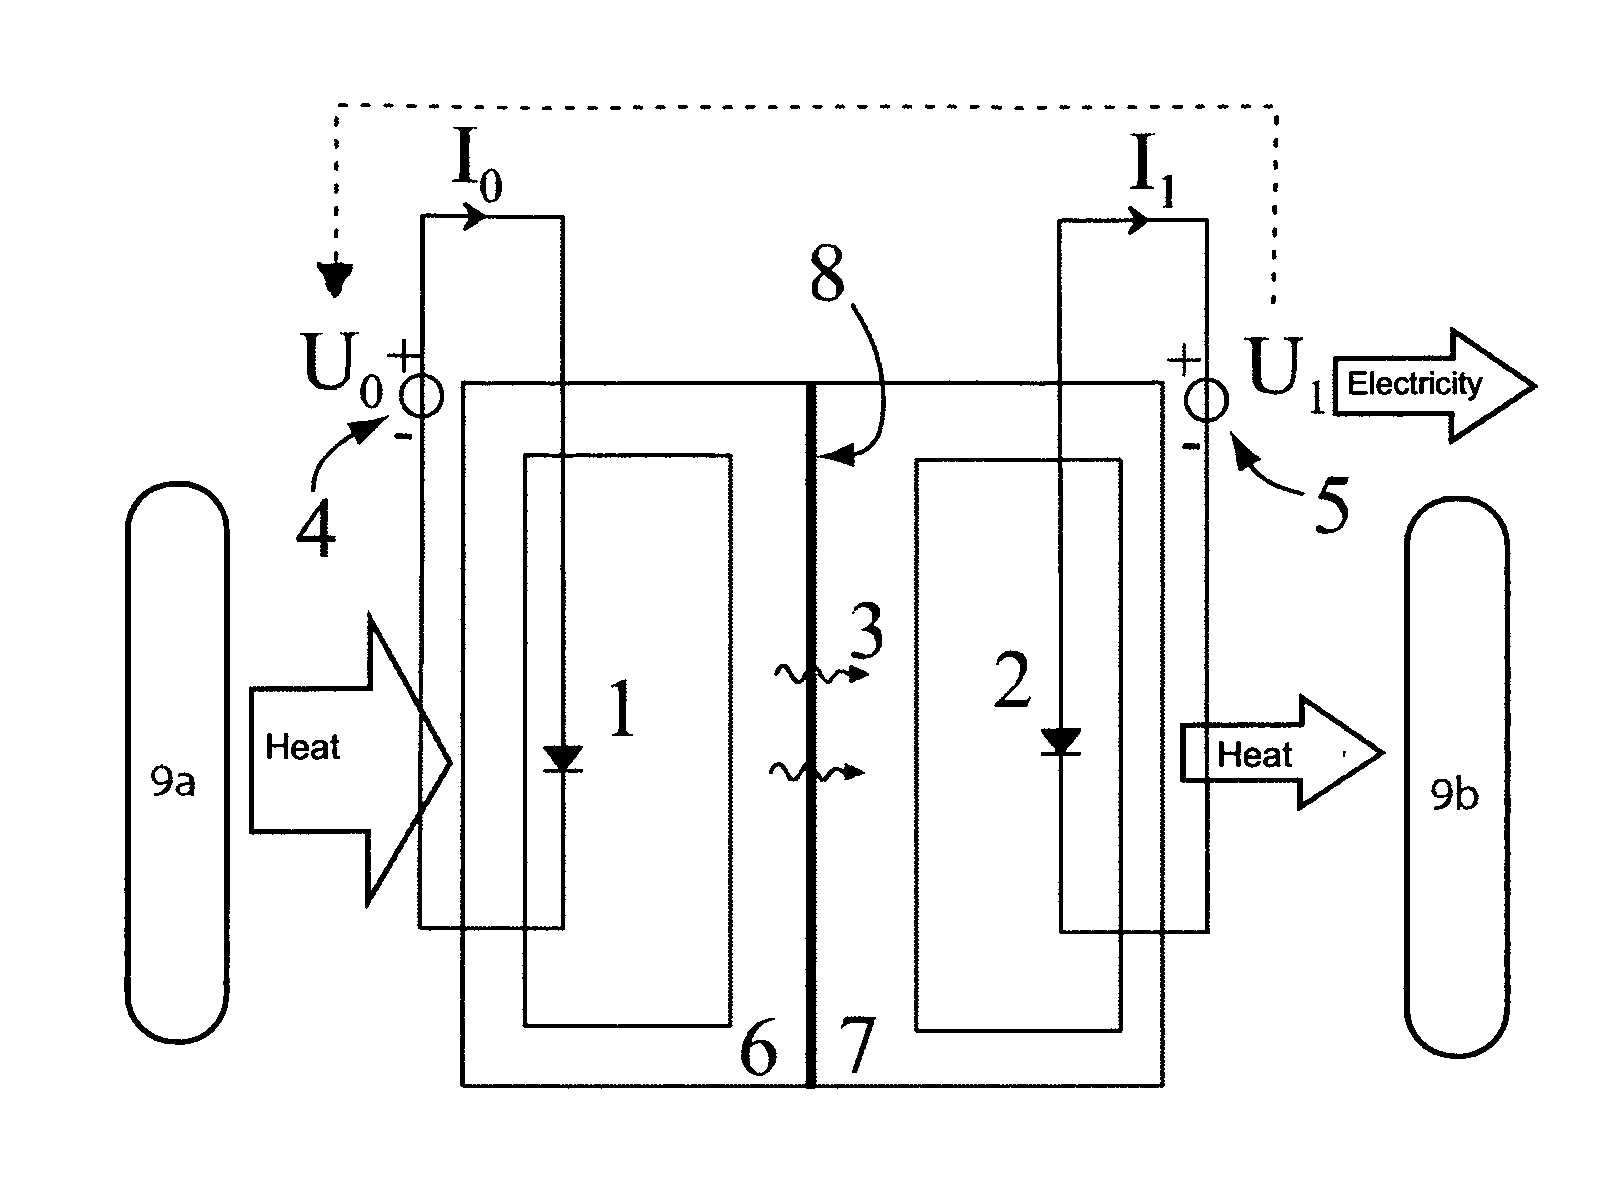 Programmable gain amplifier with multi-range operation for use in body sensor interface applications